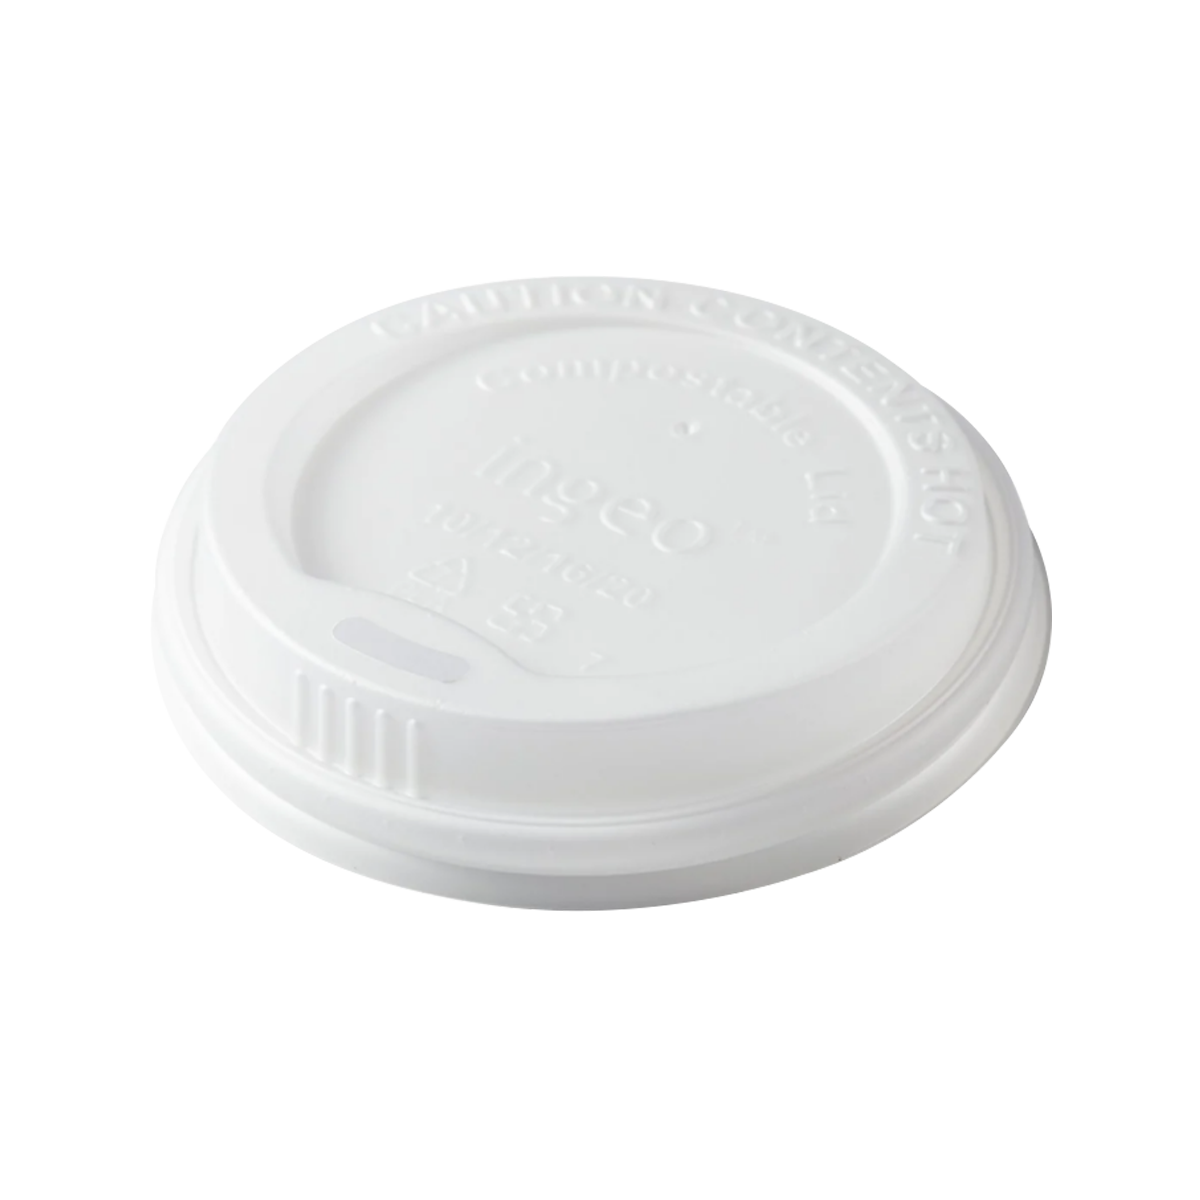 CPLA biodegradable food packing container lid